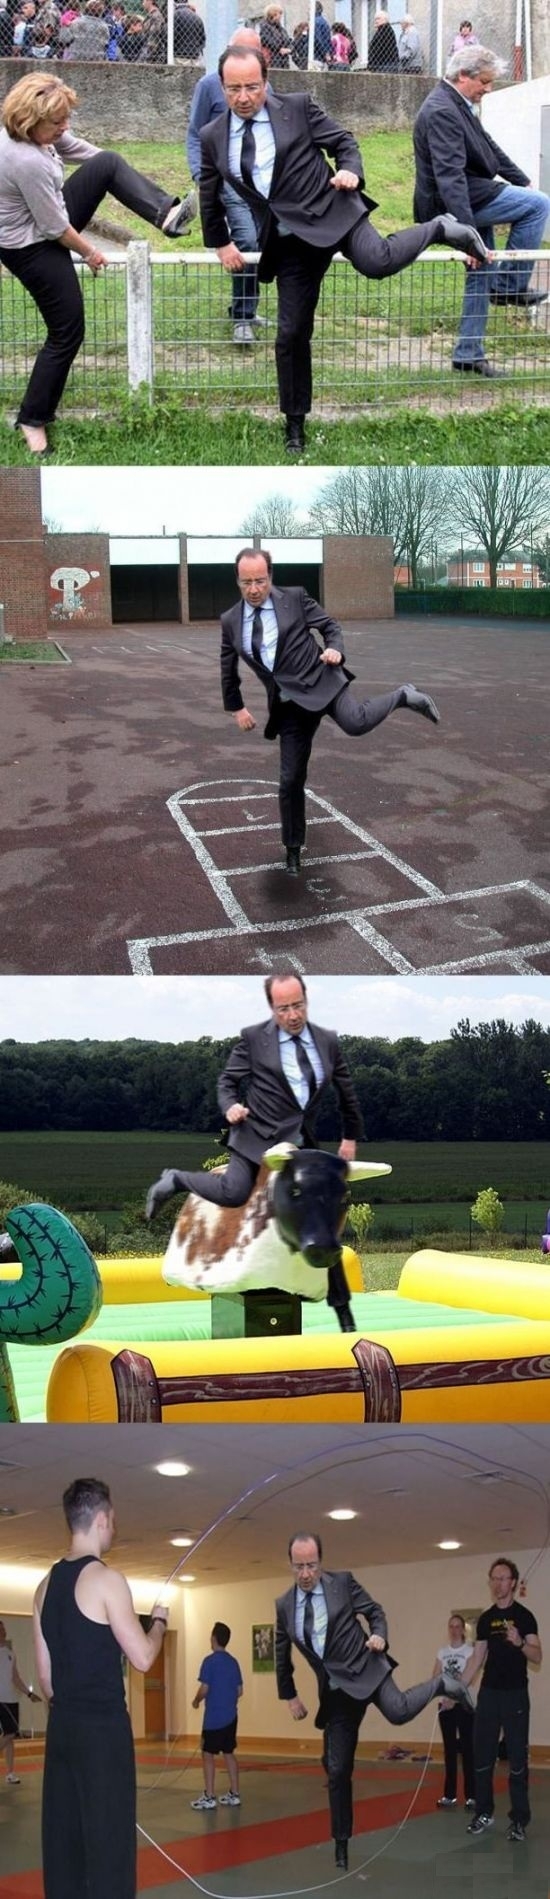 So french President jumped a fence